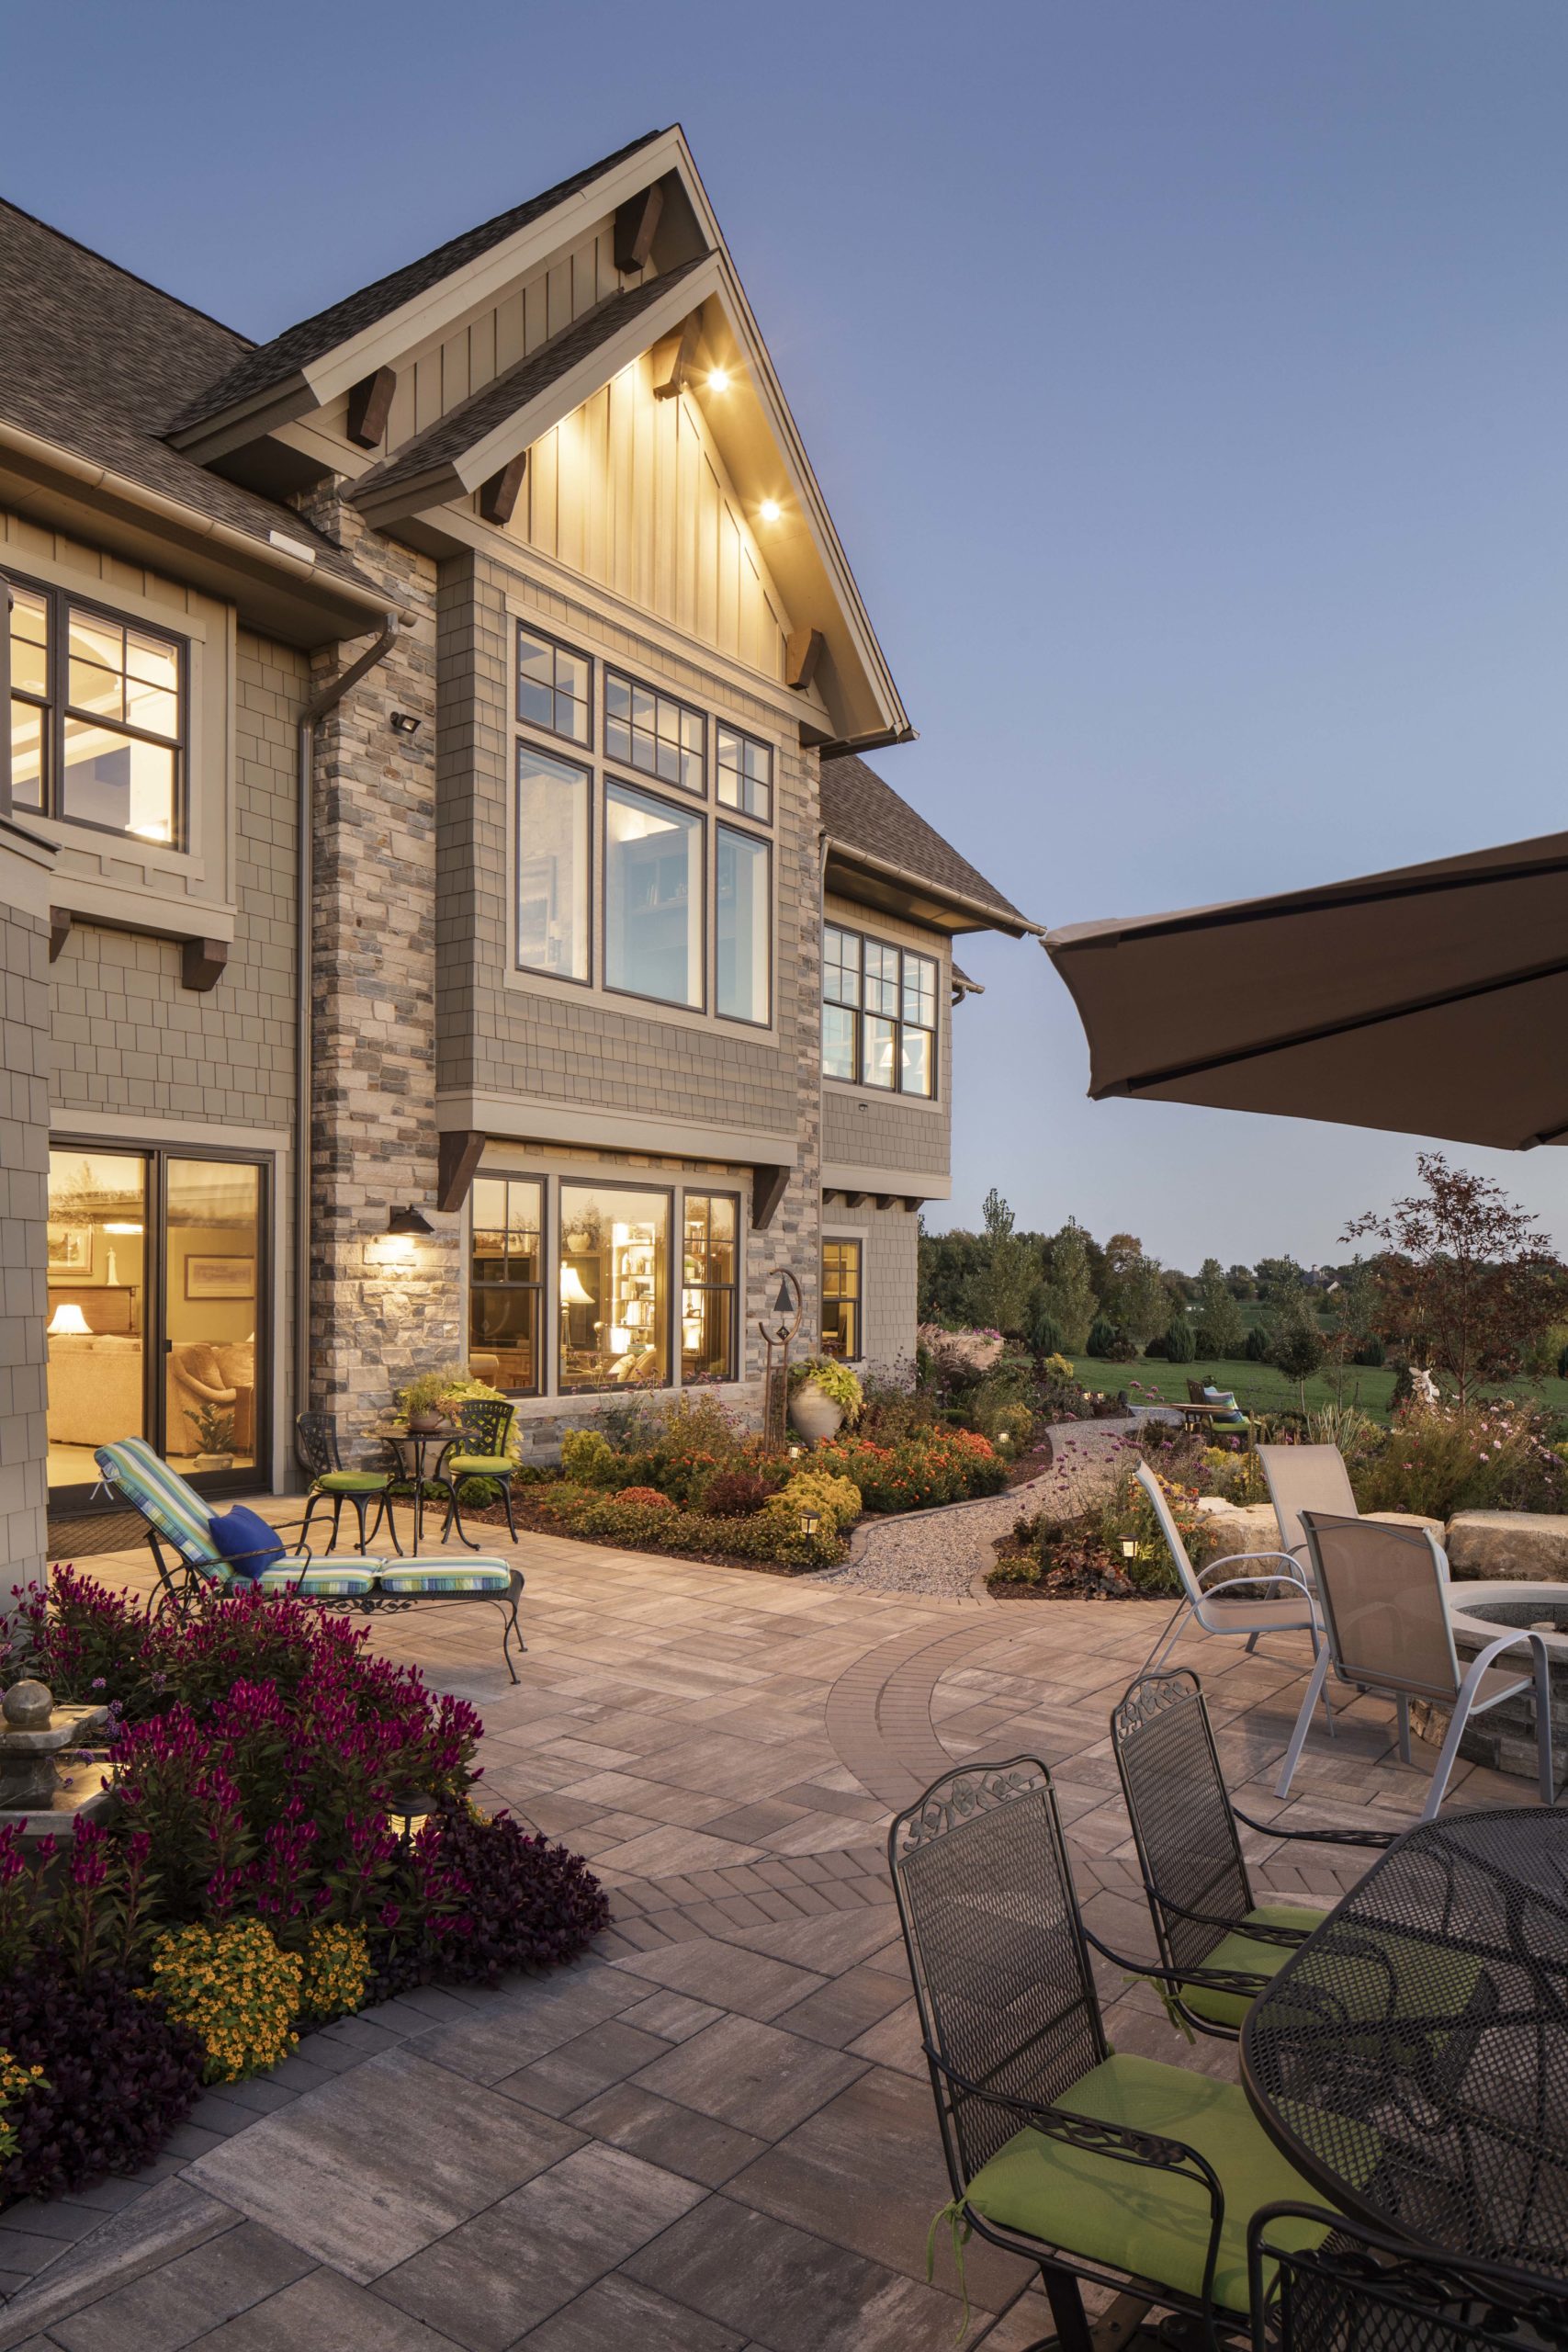 A prairie-style home with a patio and outdoor furniture at dusk.